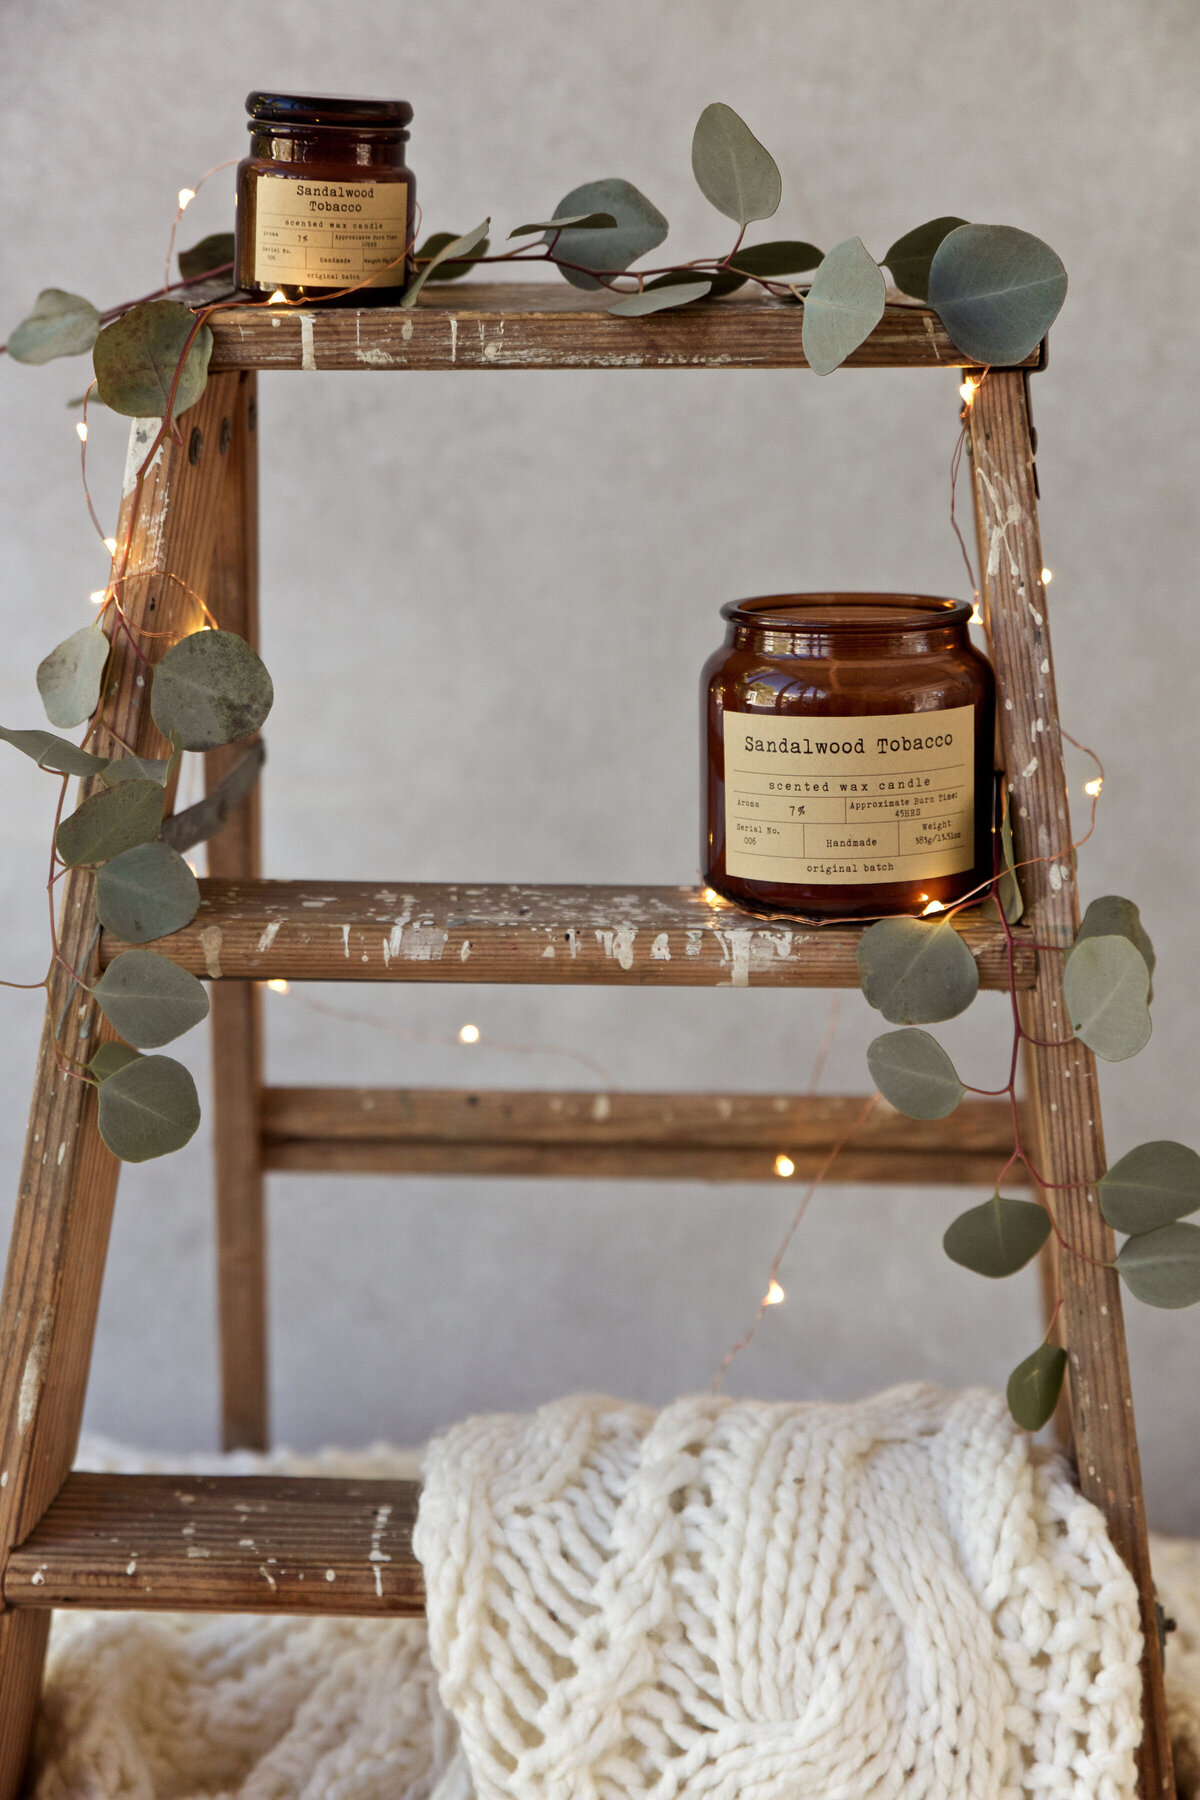 Product photographer Chelsea Loren cozy bohemian scene for luxurious and natural candle company.